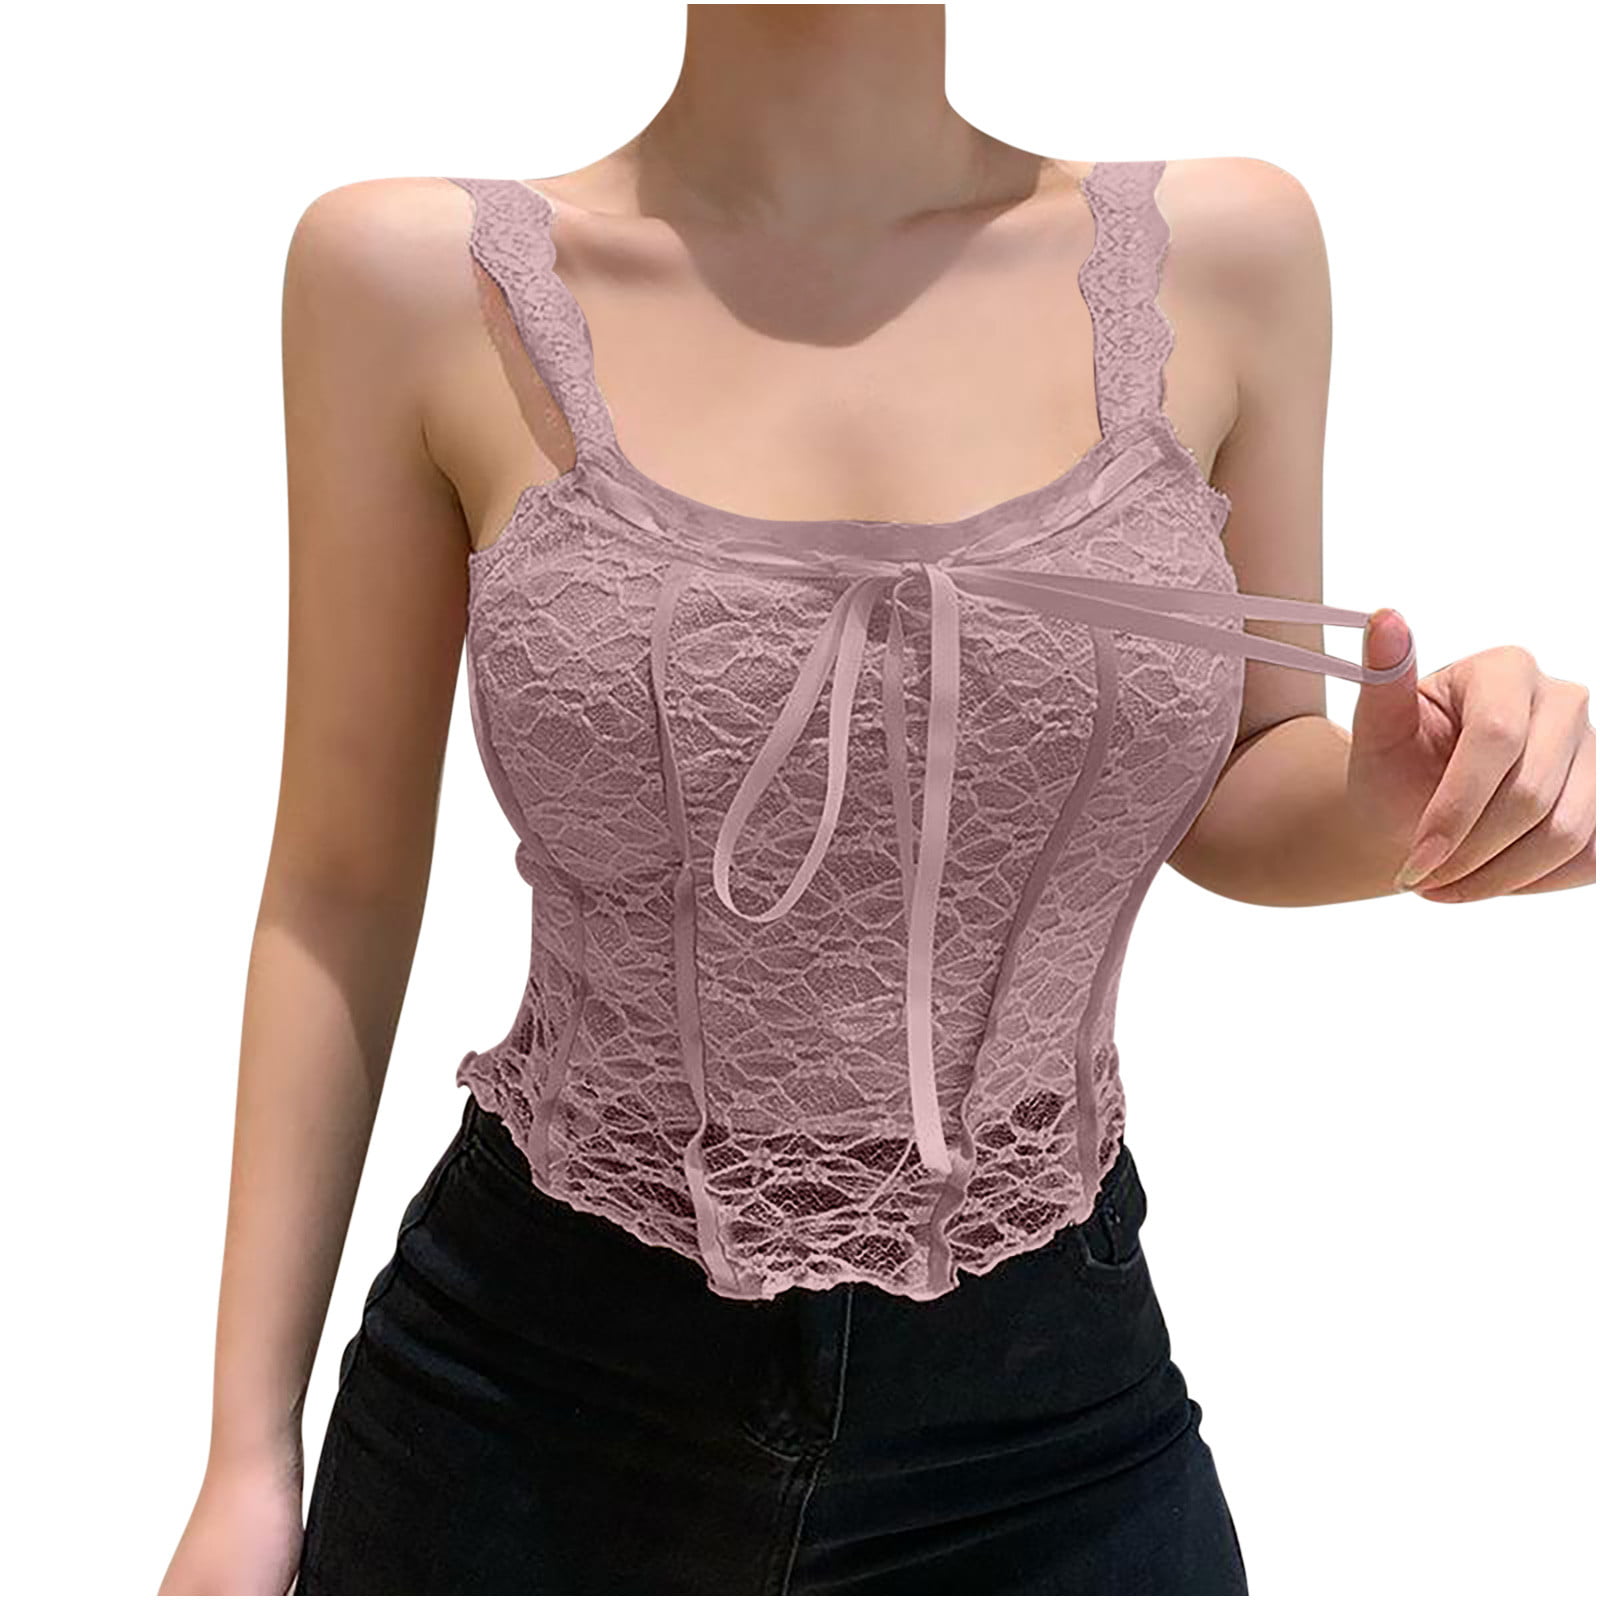 YYDGH Women's Y2k Lace Cami Crop Top Sleeveless Sexy Tank Tops Camisole  Clubwear Pink M 